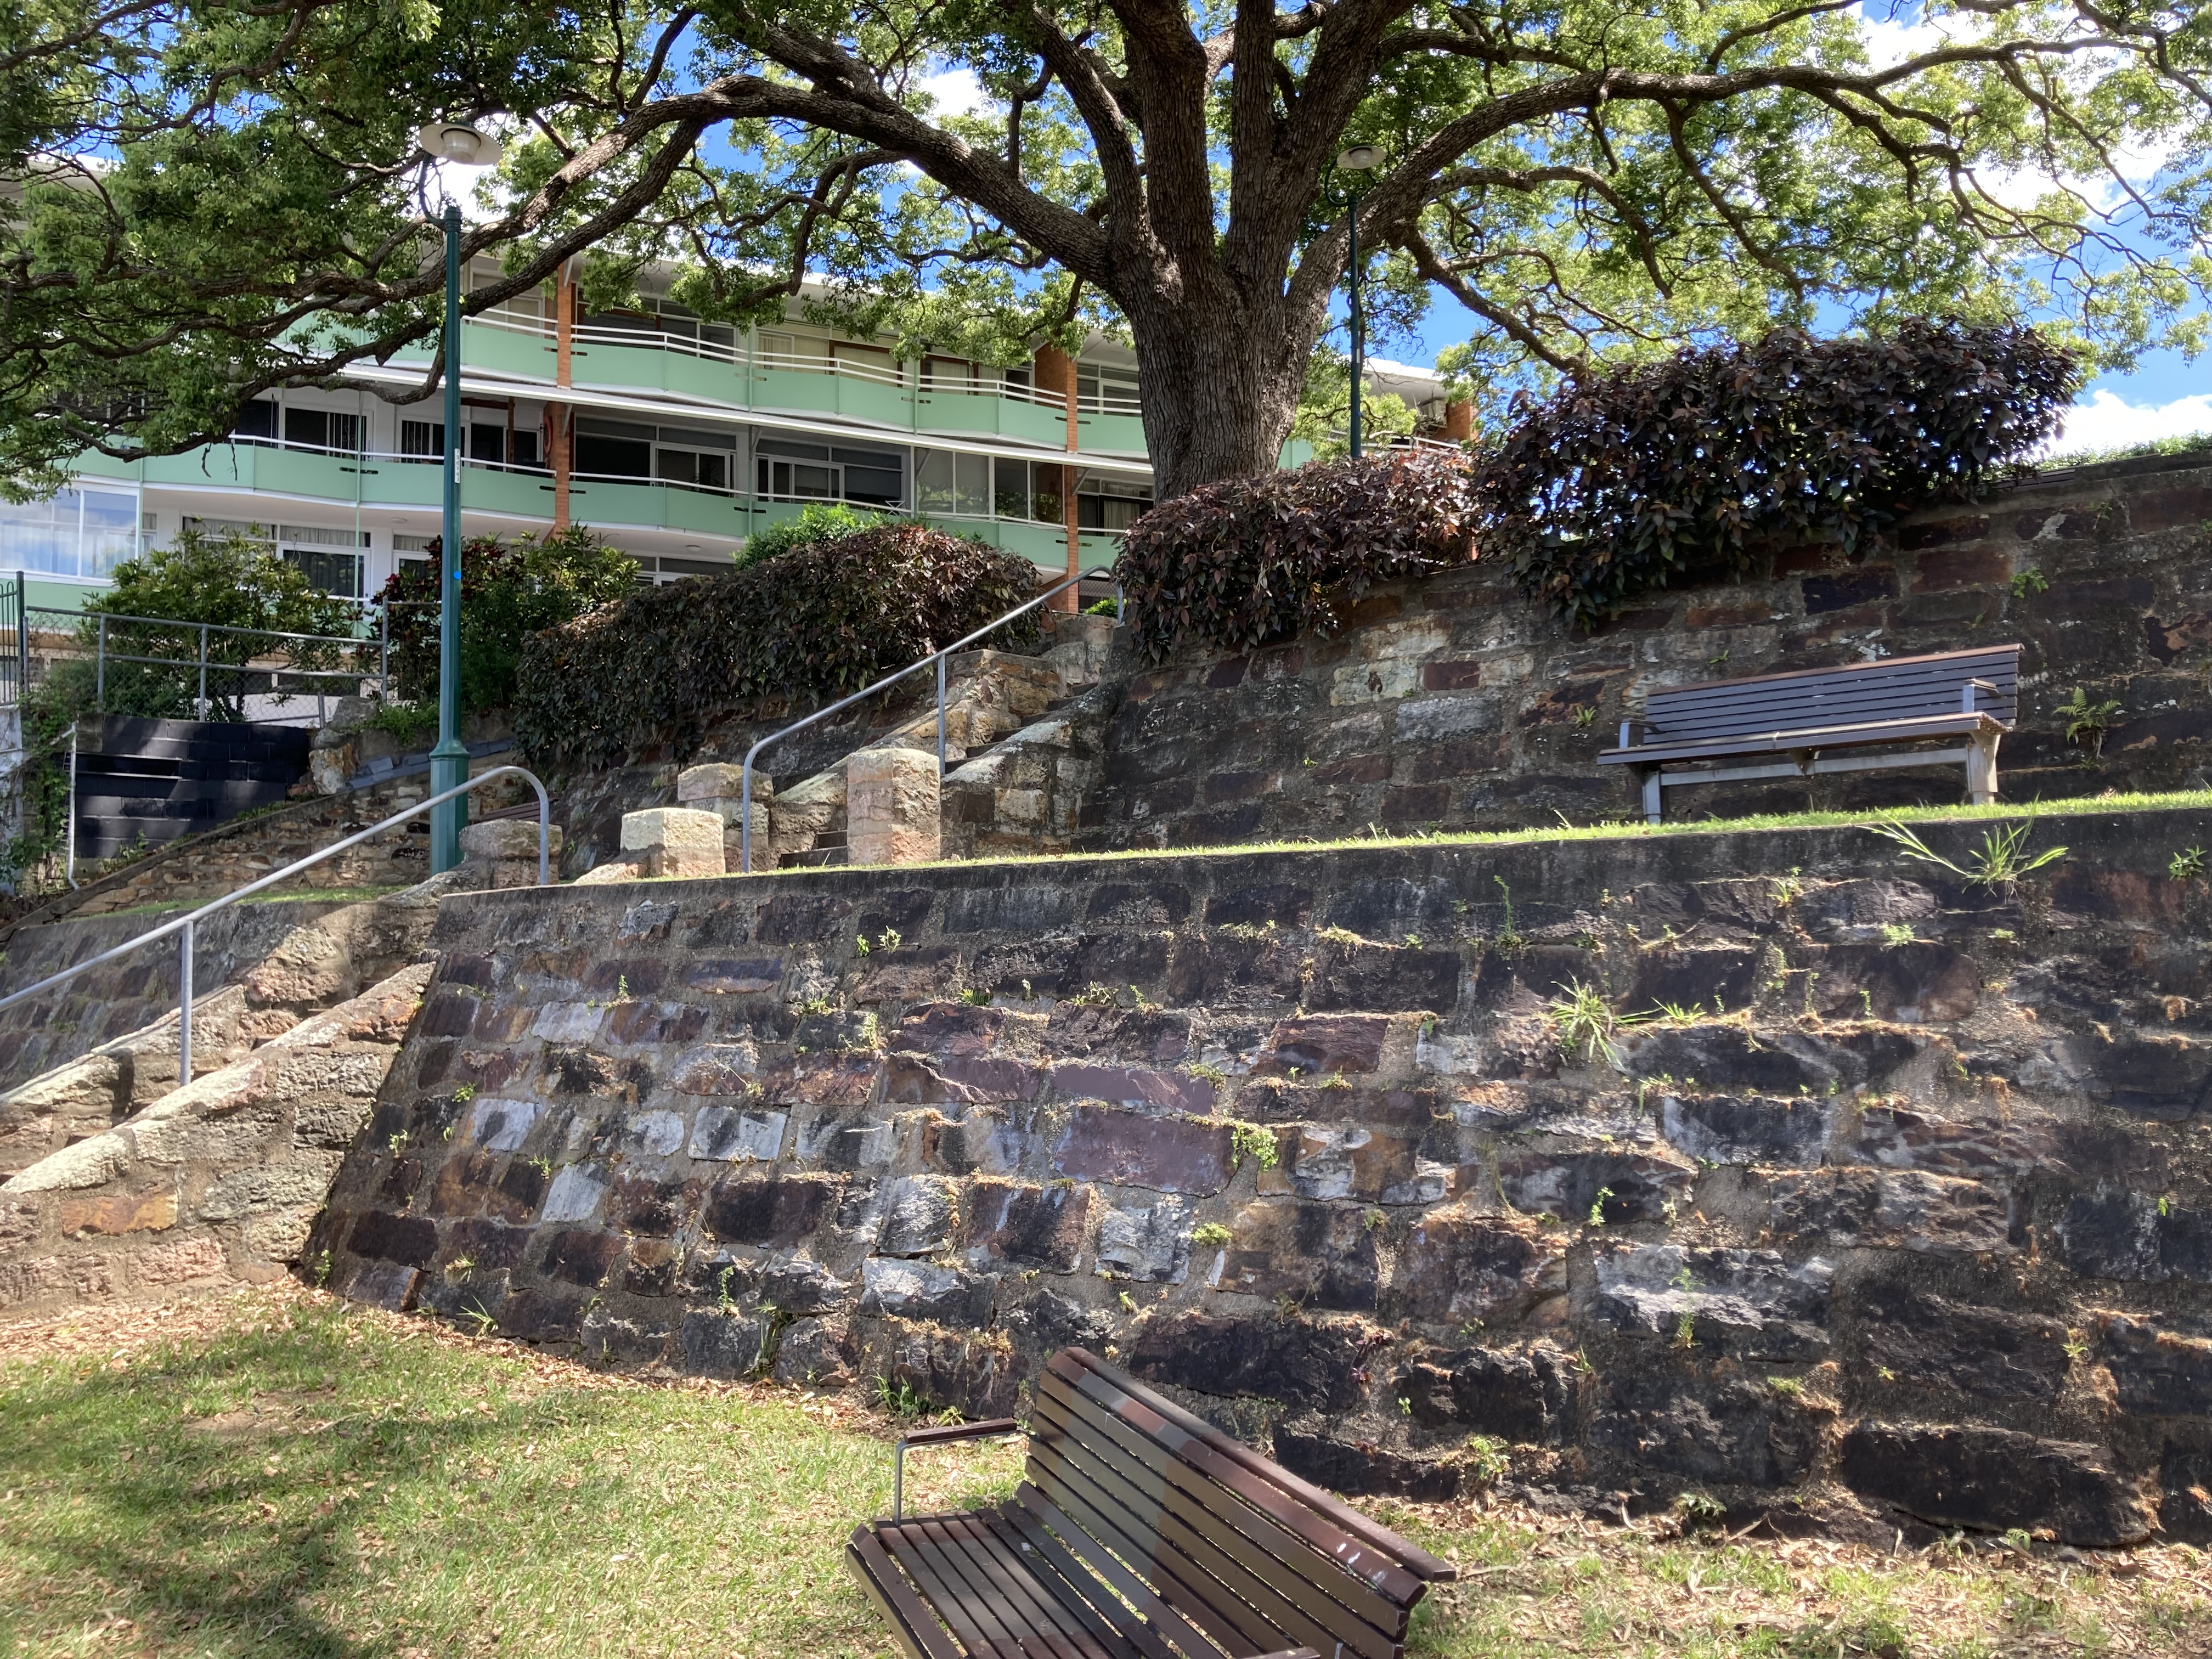 A large stone block wall. Stone stairs with a metal railing are in the background, with a large apartment block and mature trees. Small timber and metal benches are in the foreground and middle ground.